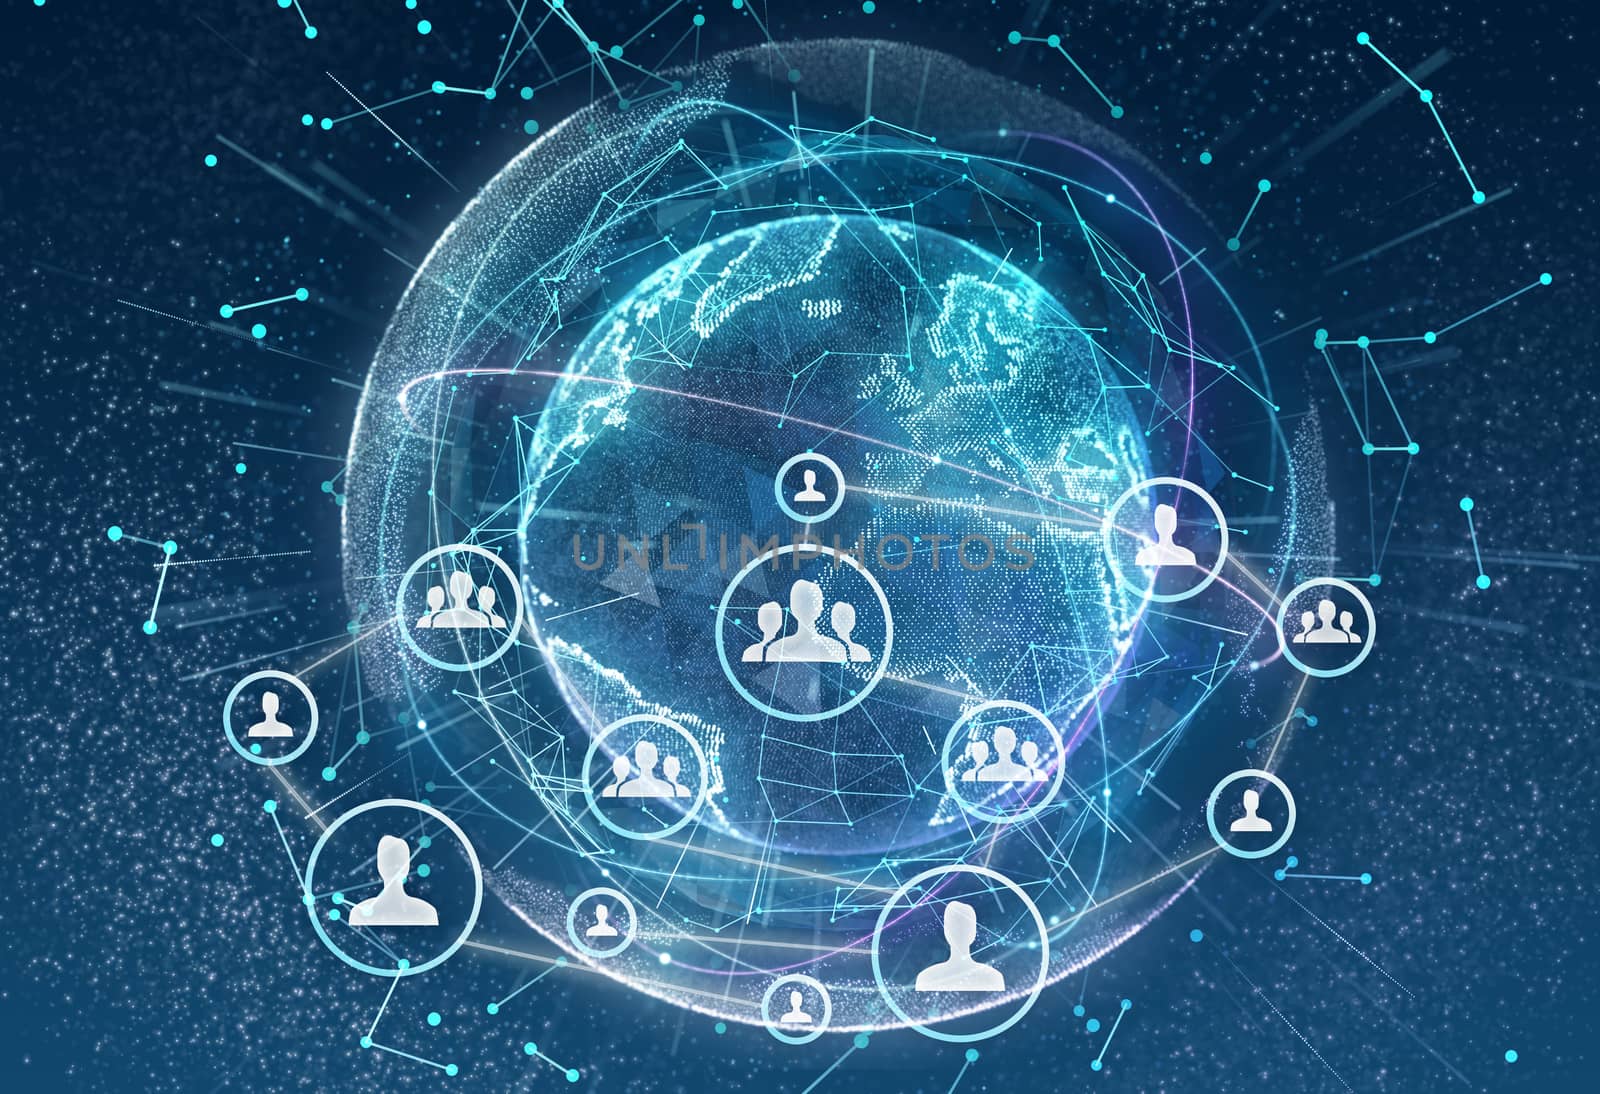 Linking entities. Networking, social media, communication on earth background. Small network connected to a larger network by Mirexon